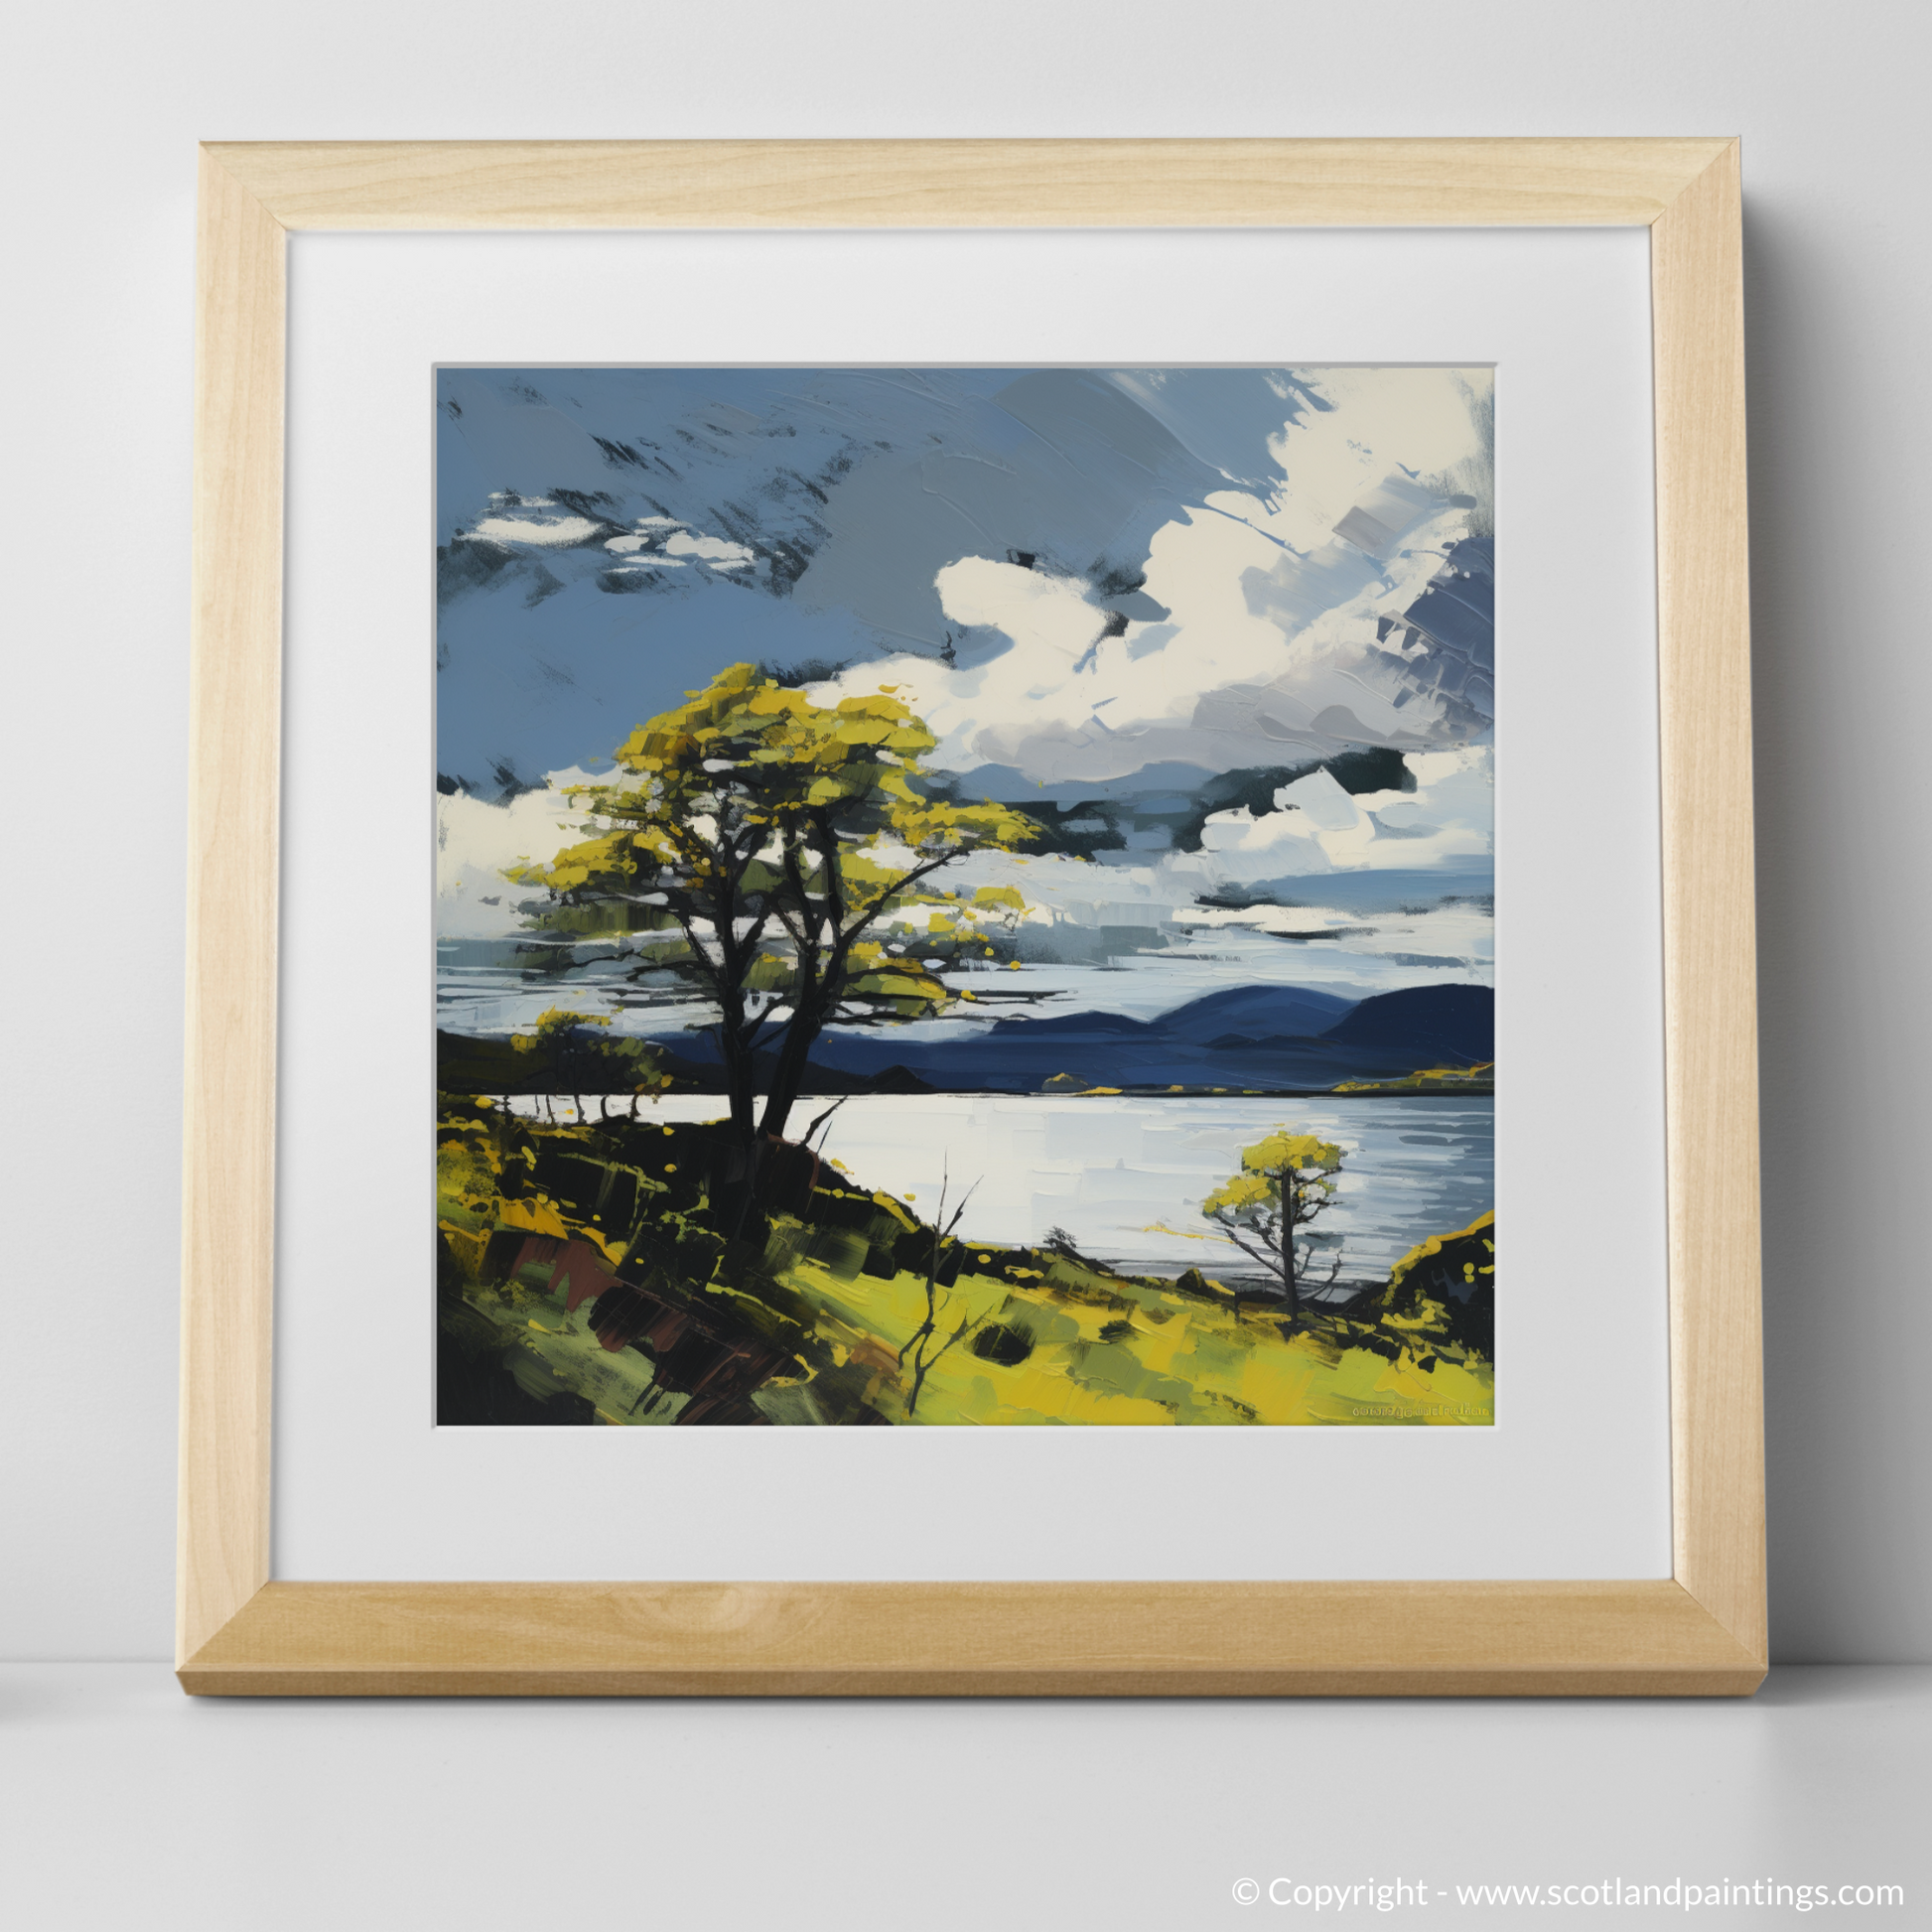 Art Print of Loch Lomond in summer with a natural frame